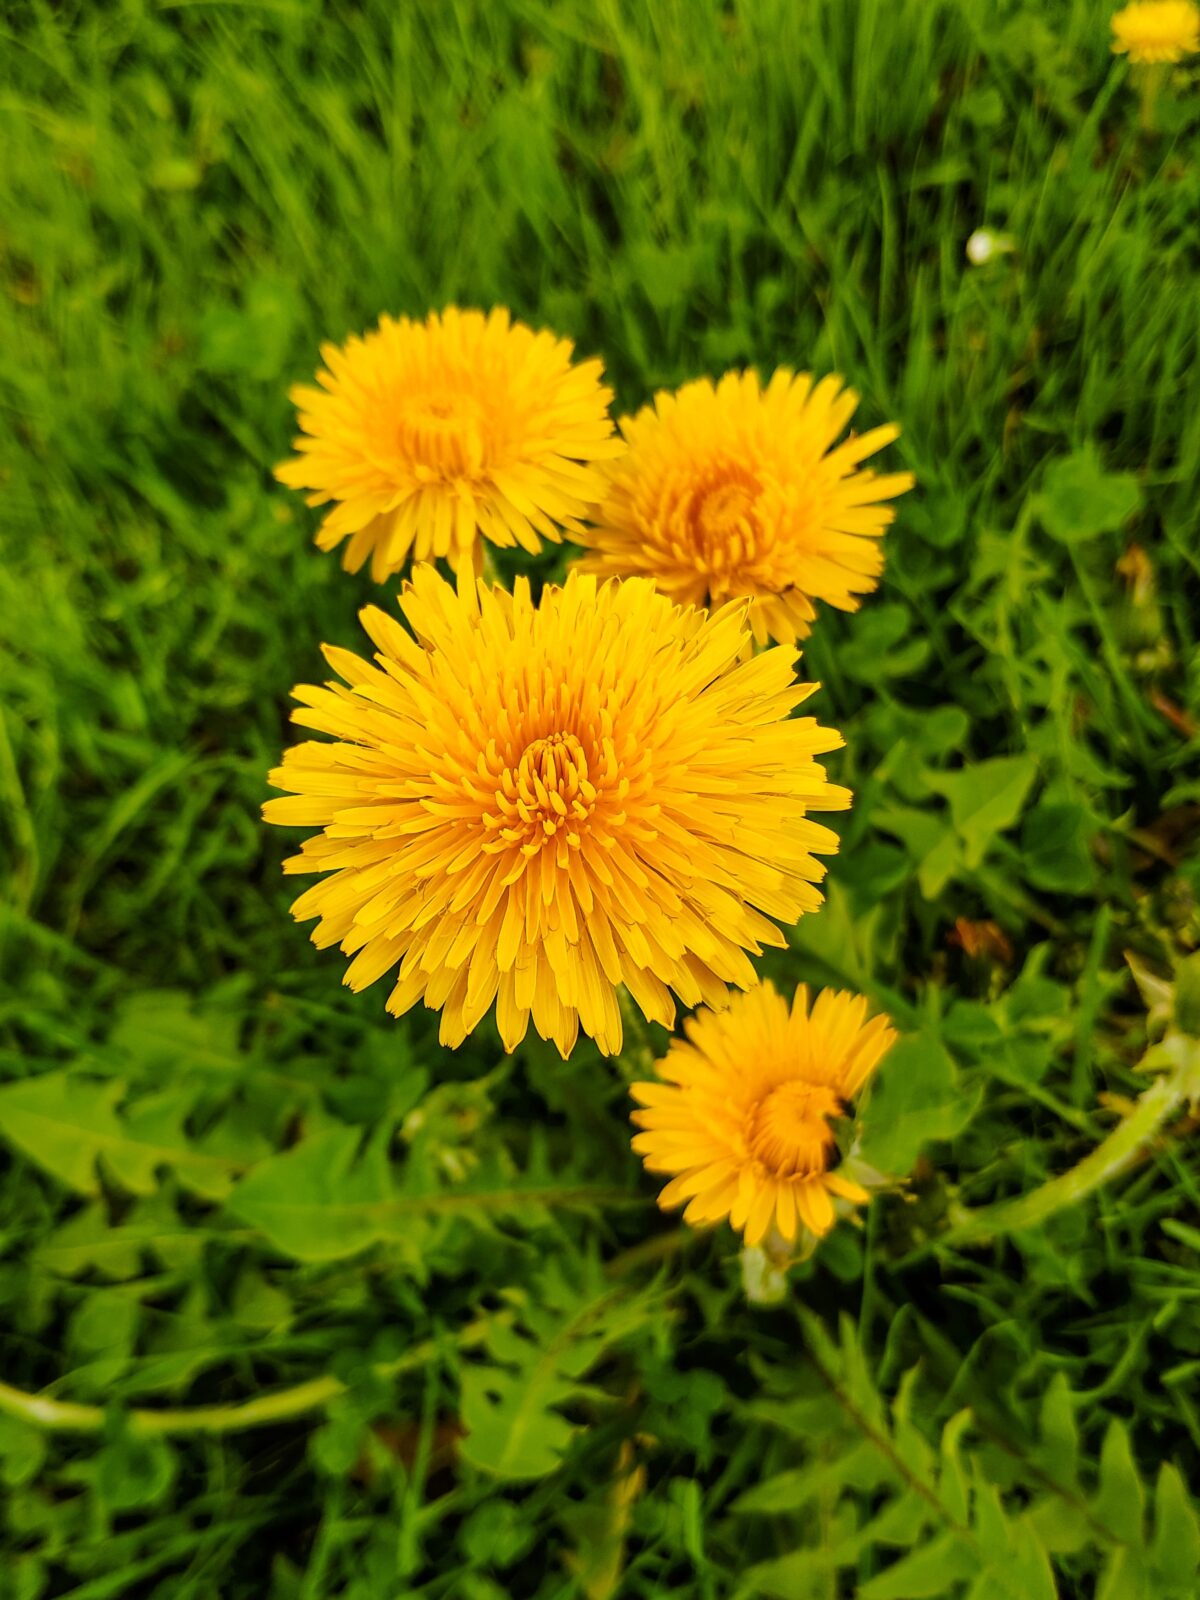 Dandelion root tea is an effective natural way to detoxify the liver and kidneys. It may also help relieve symptoms of joint pain, bloating, gas, and other problems. Learn how to make dandelion root tea here.